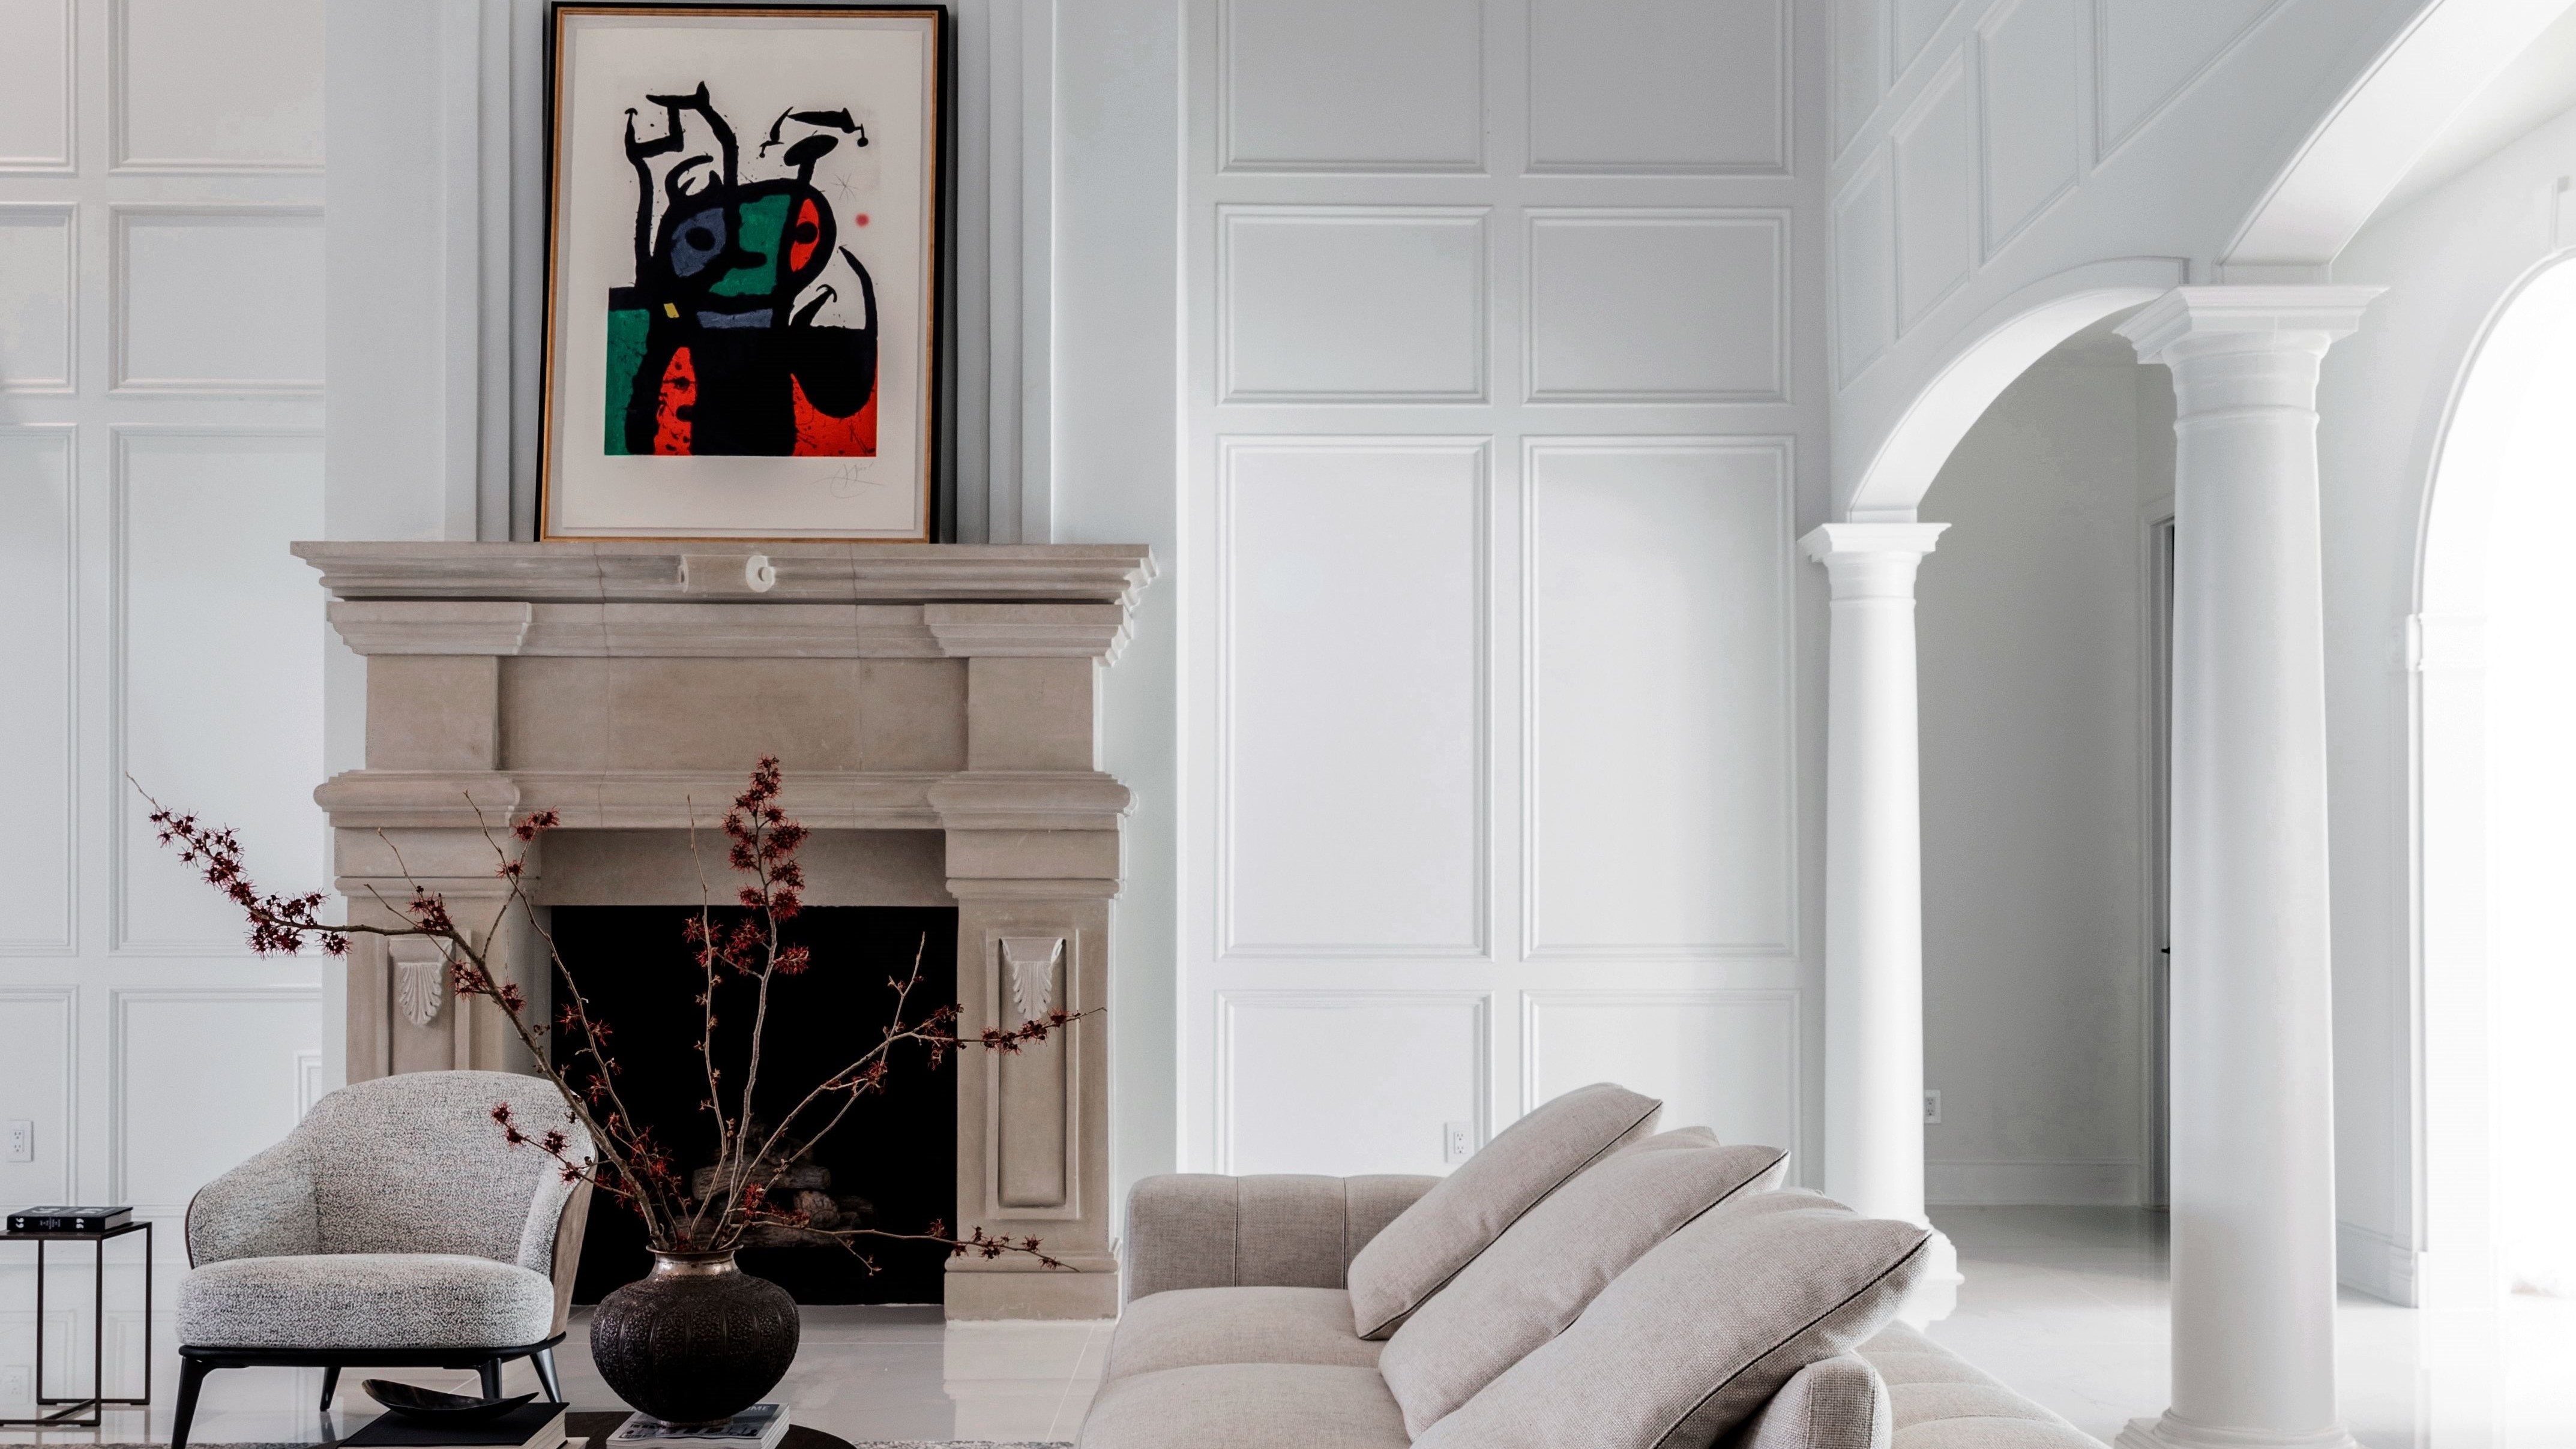 Designer-Approved Tips to Make the Most of High Ceilings